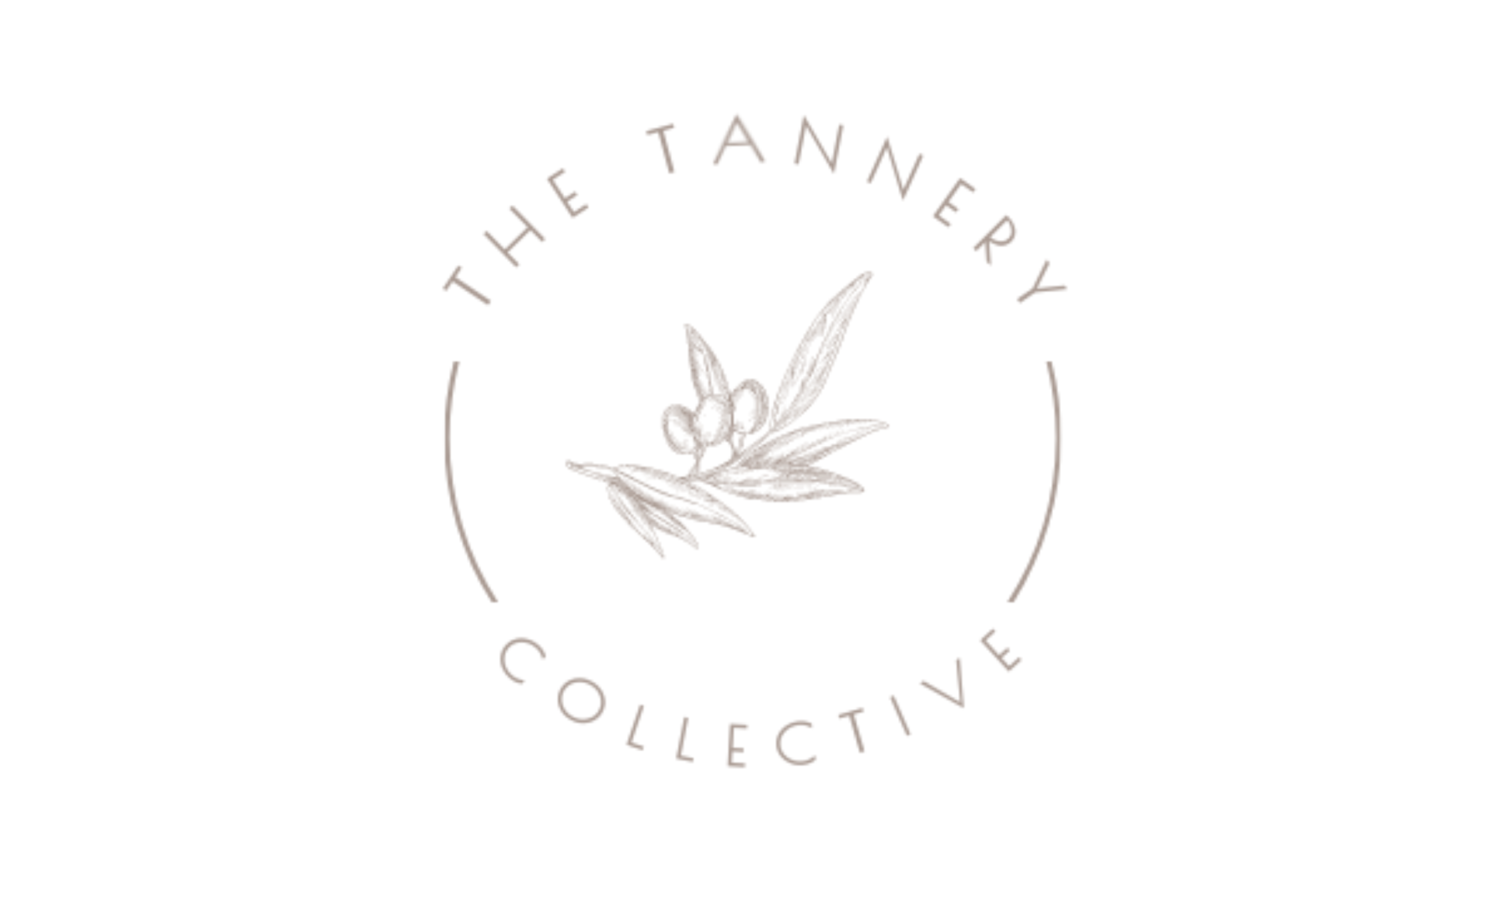 The Tannery Collective